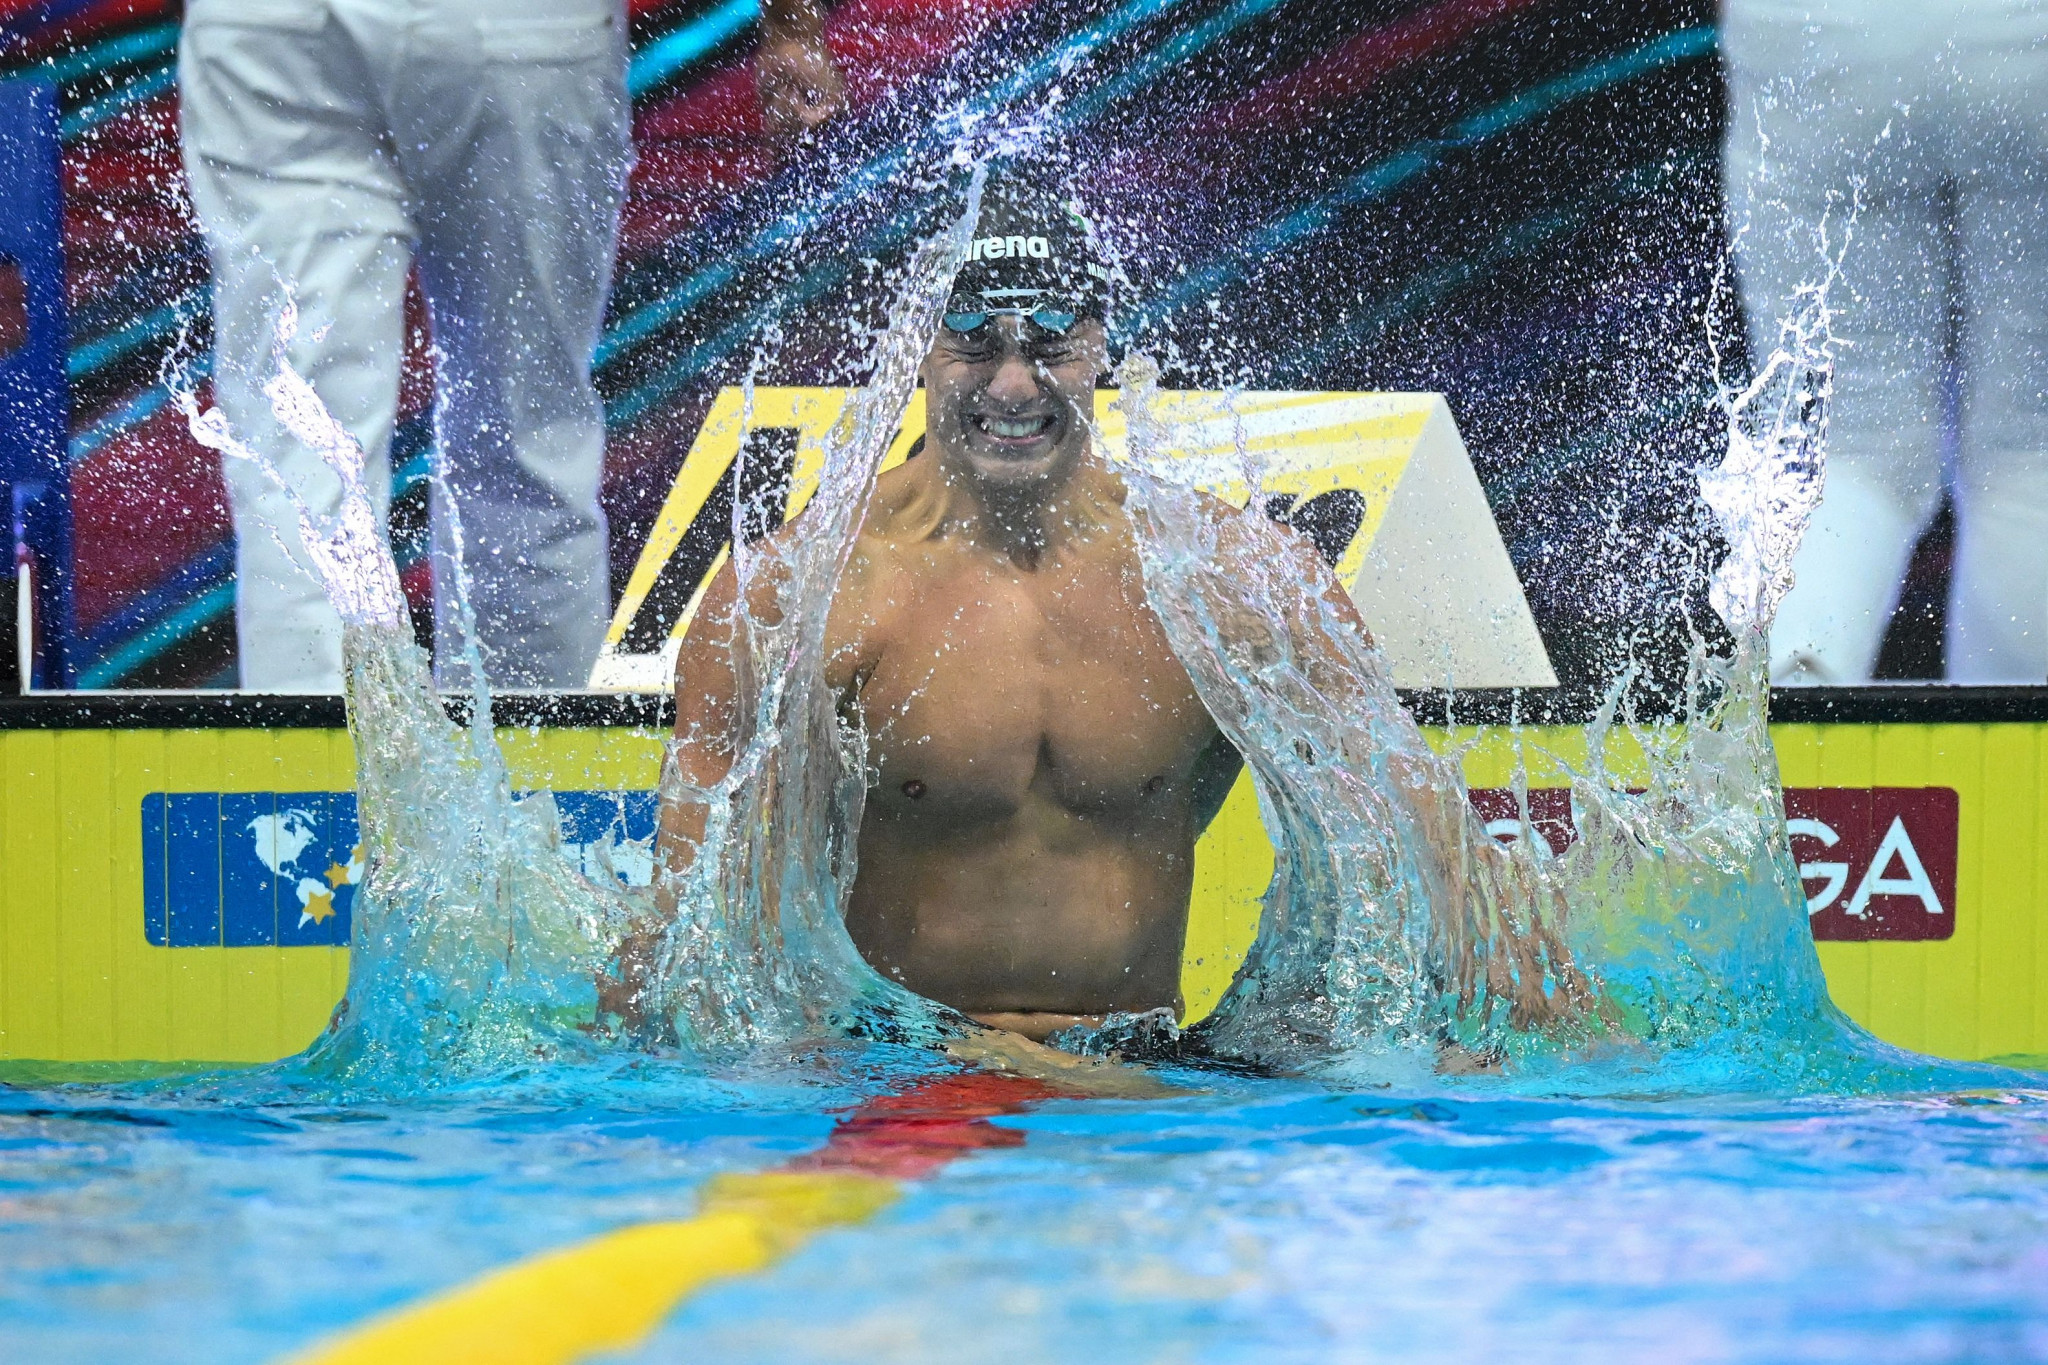 Italy's Nicolò Martinenghi was triumphant in the men's 100m breaststroke final at the Duna Arena ©Getty Images